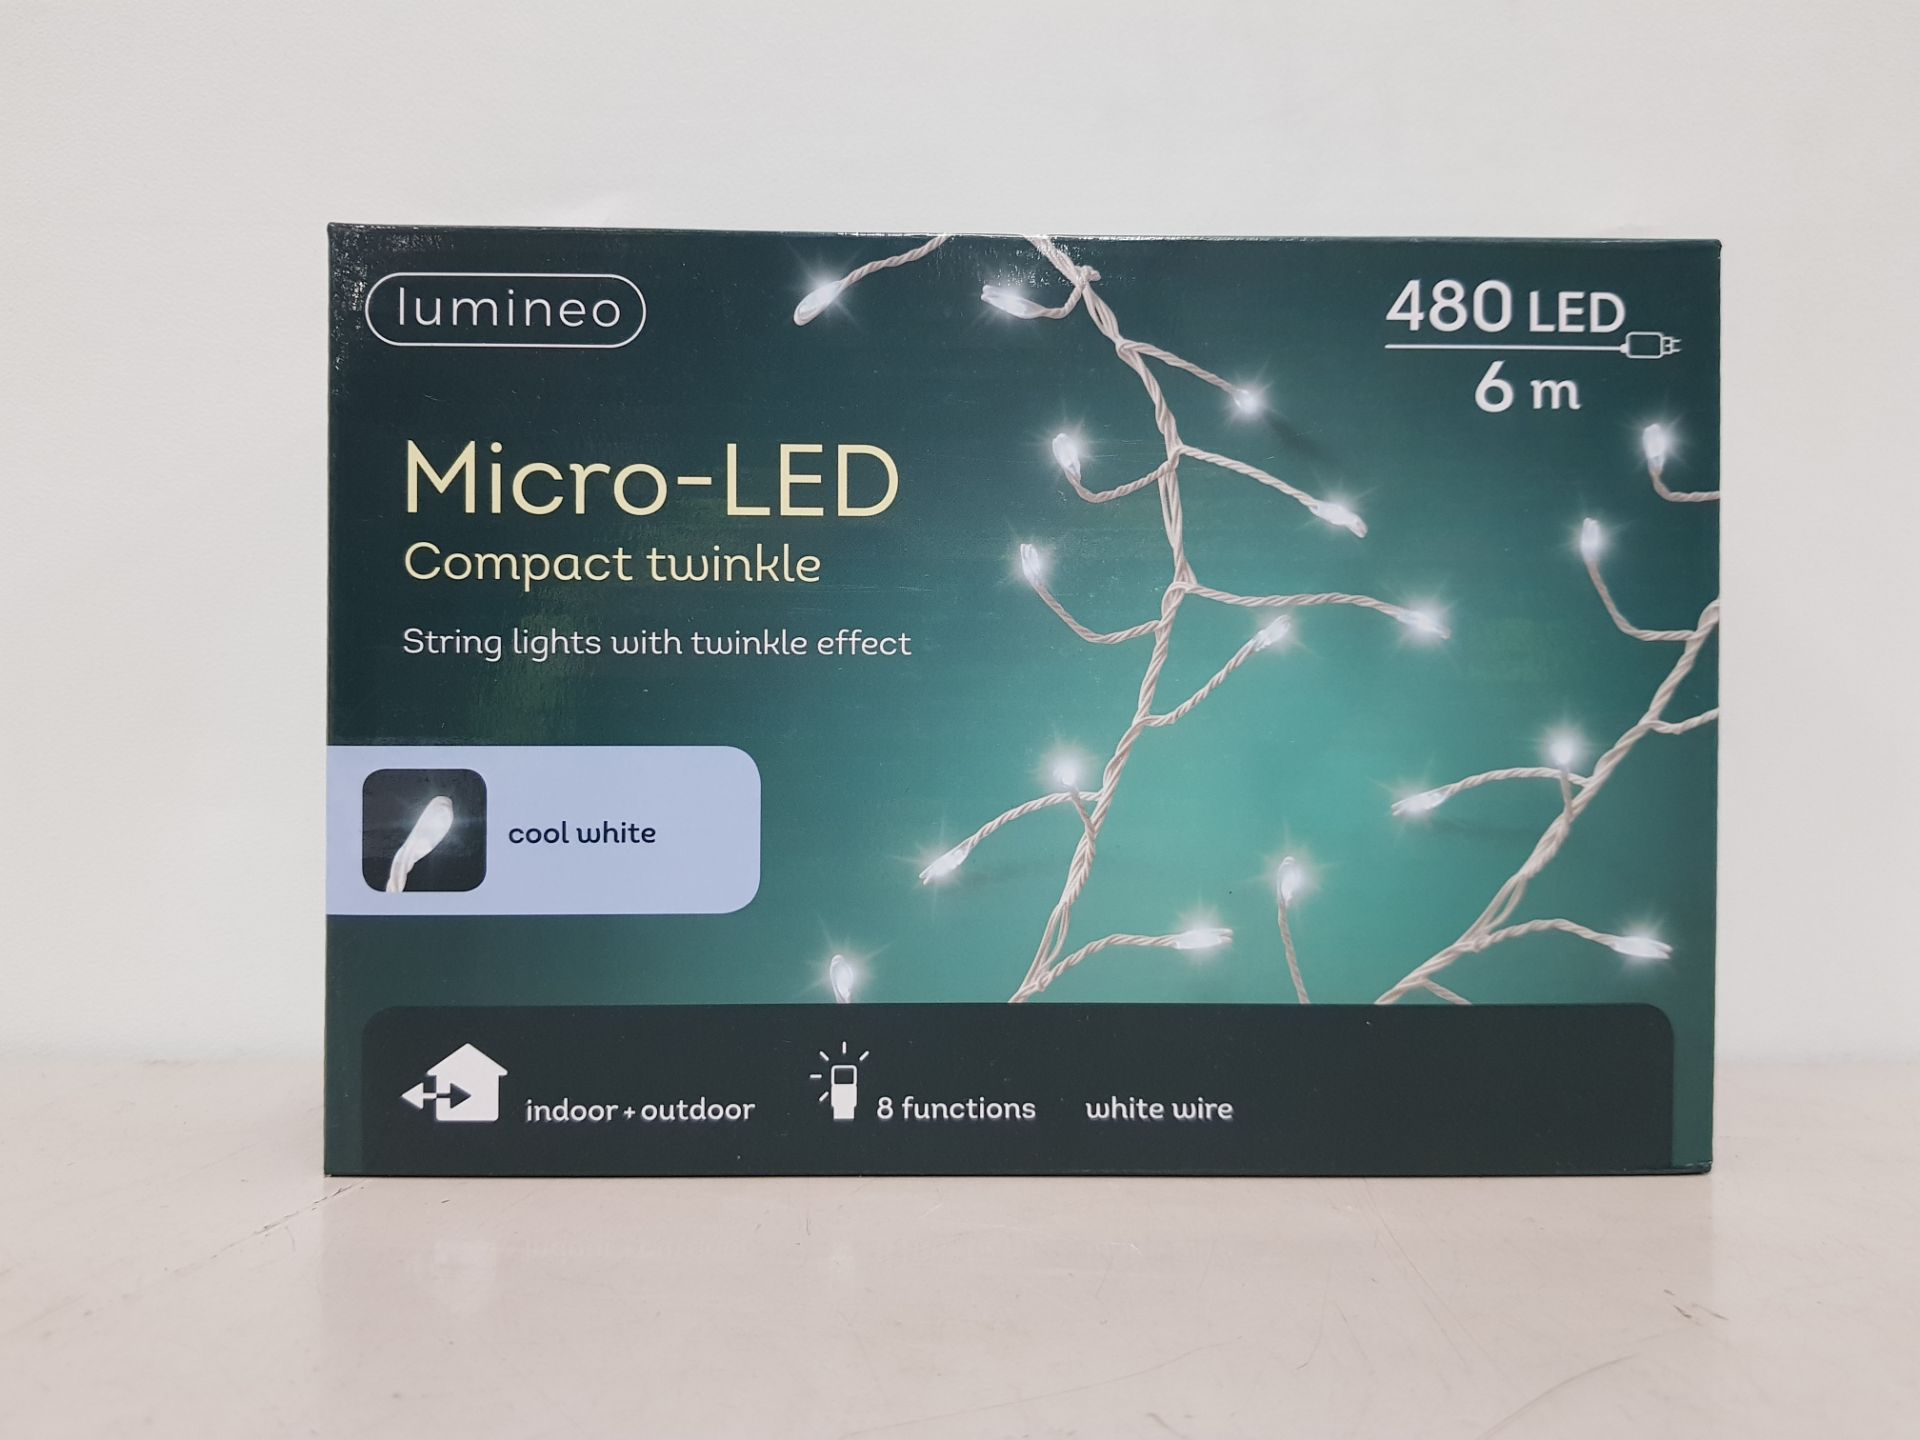 10 X BRAND NEW LUMINEO MICRO-LED 480 LED COMPACT TWINKLE LIGHTS IN COOL WHITE - 6M LENGTH